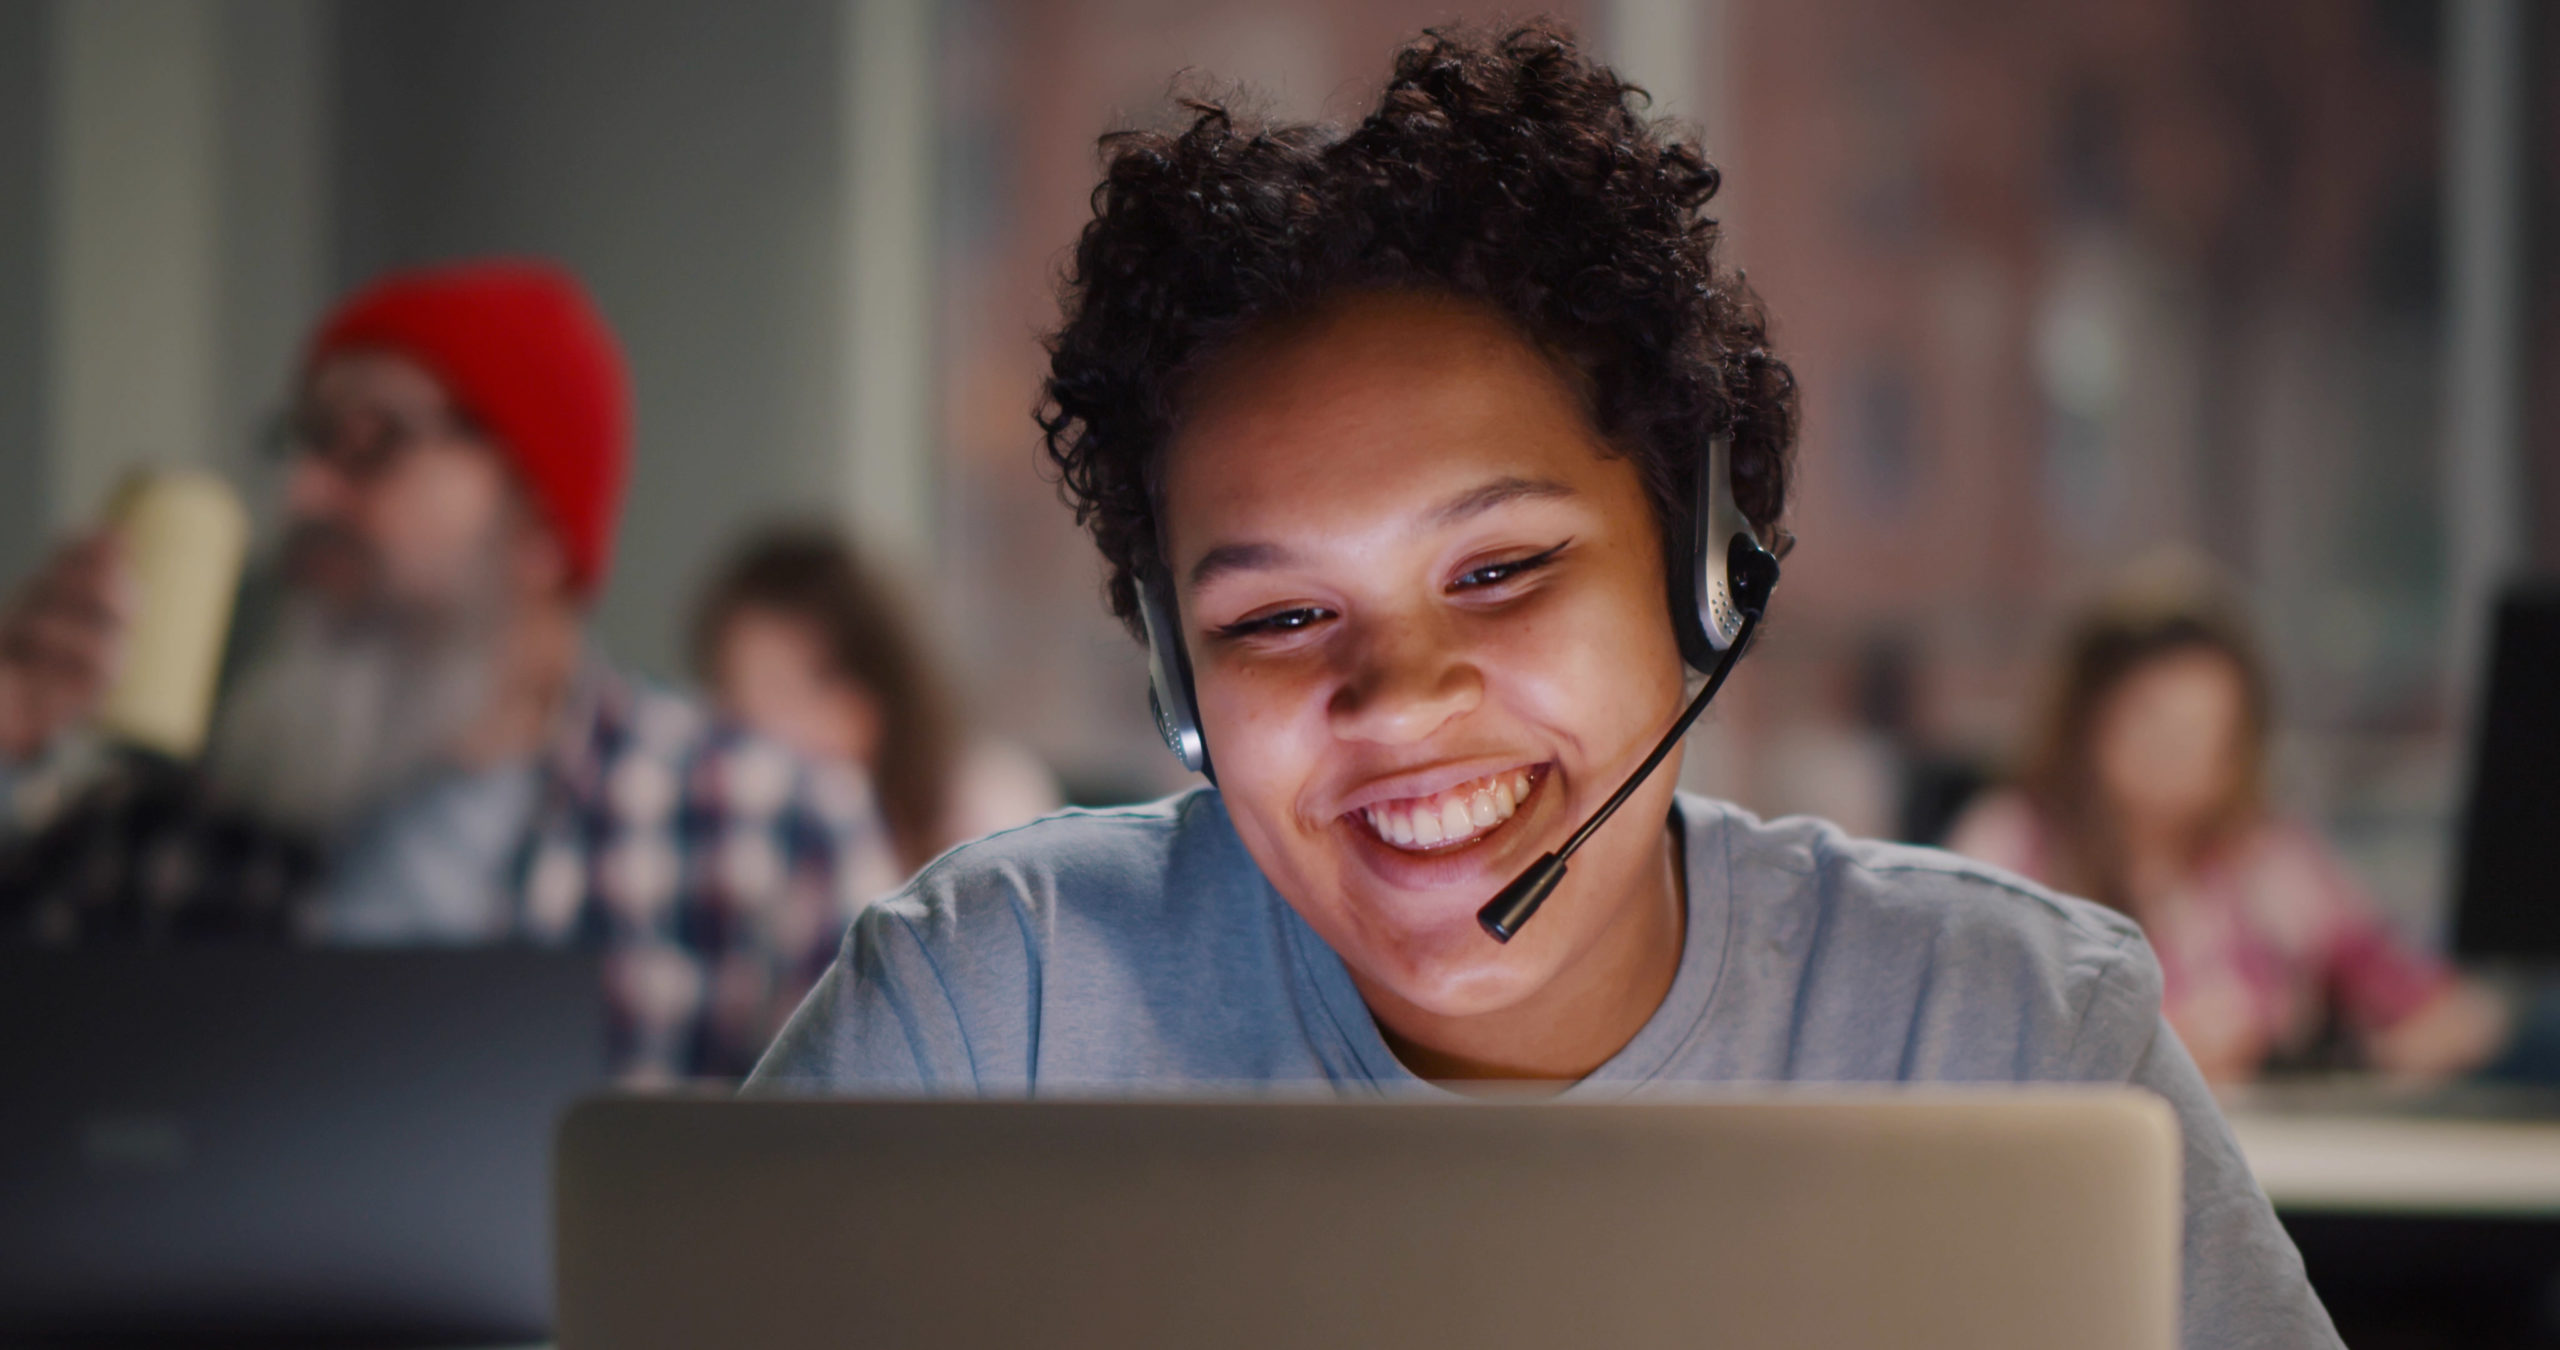 Small business customer service: How to provide an excellent experience